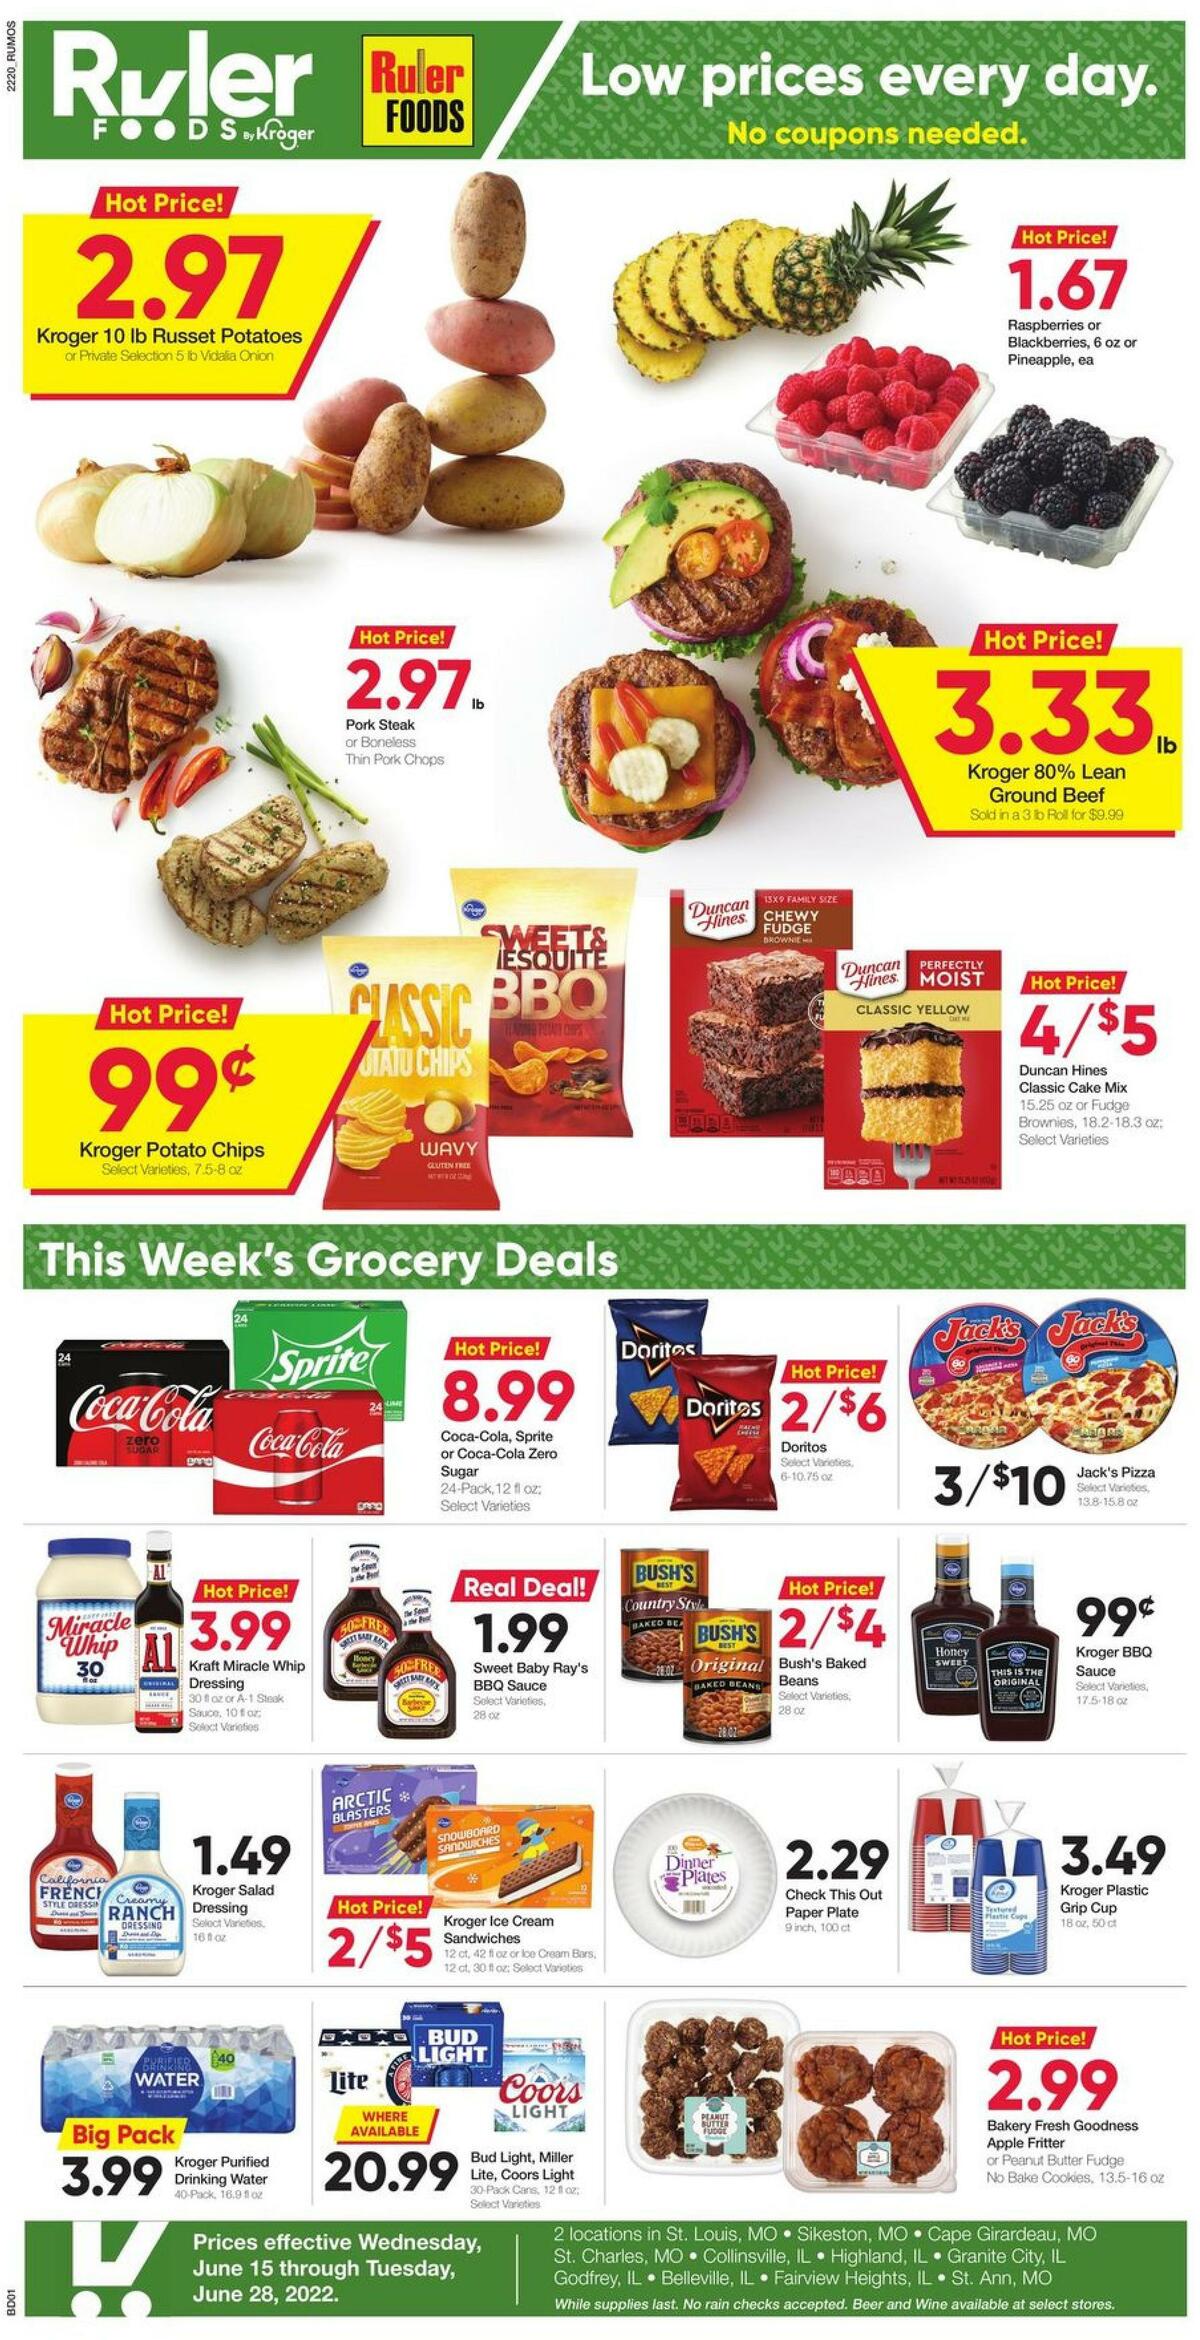 Ruler Foods Weekly Ad from June 15